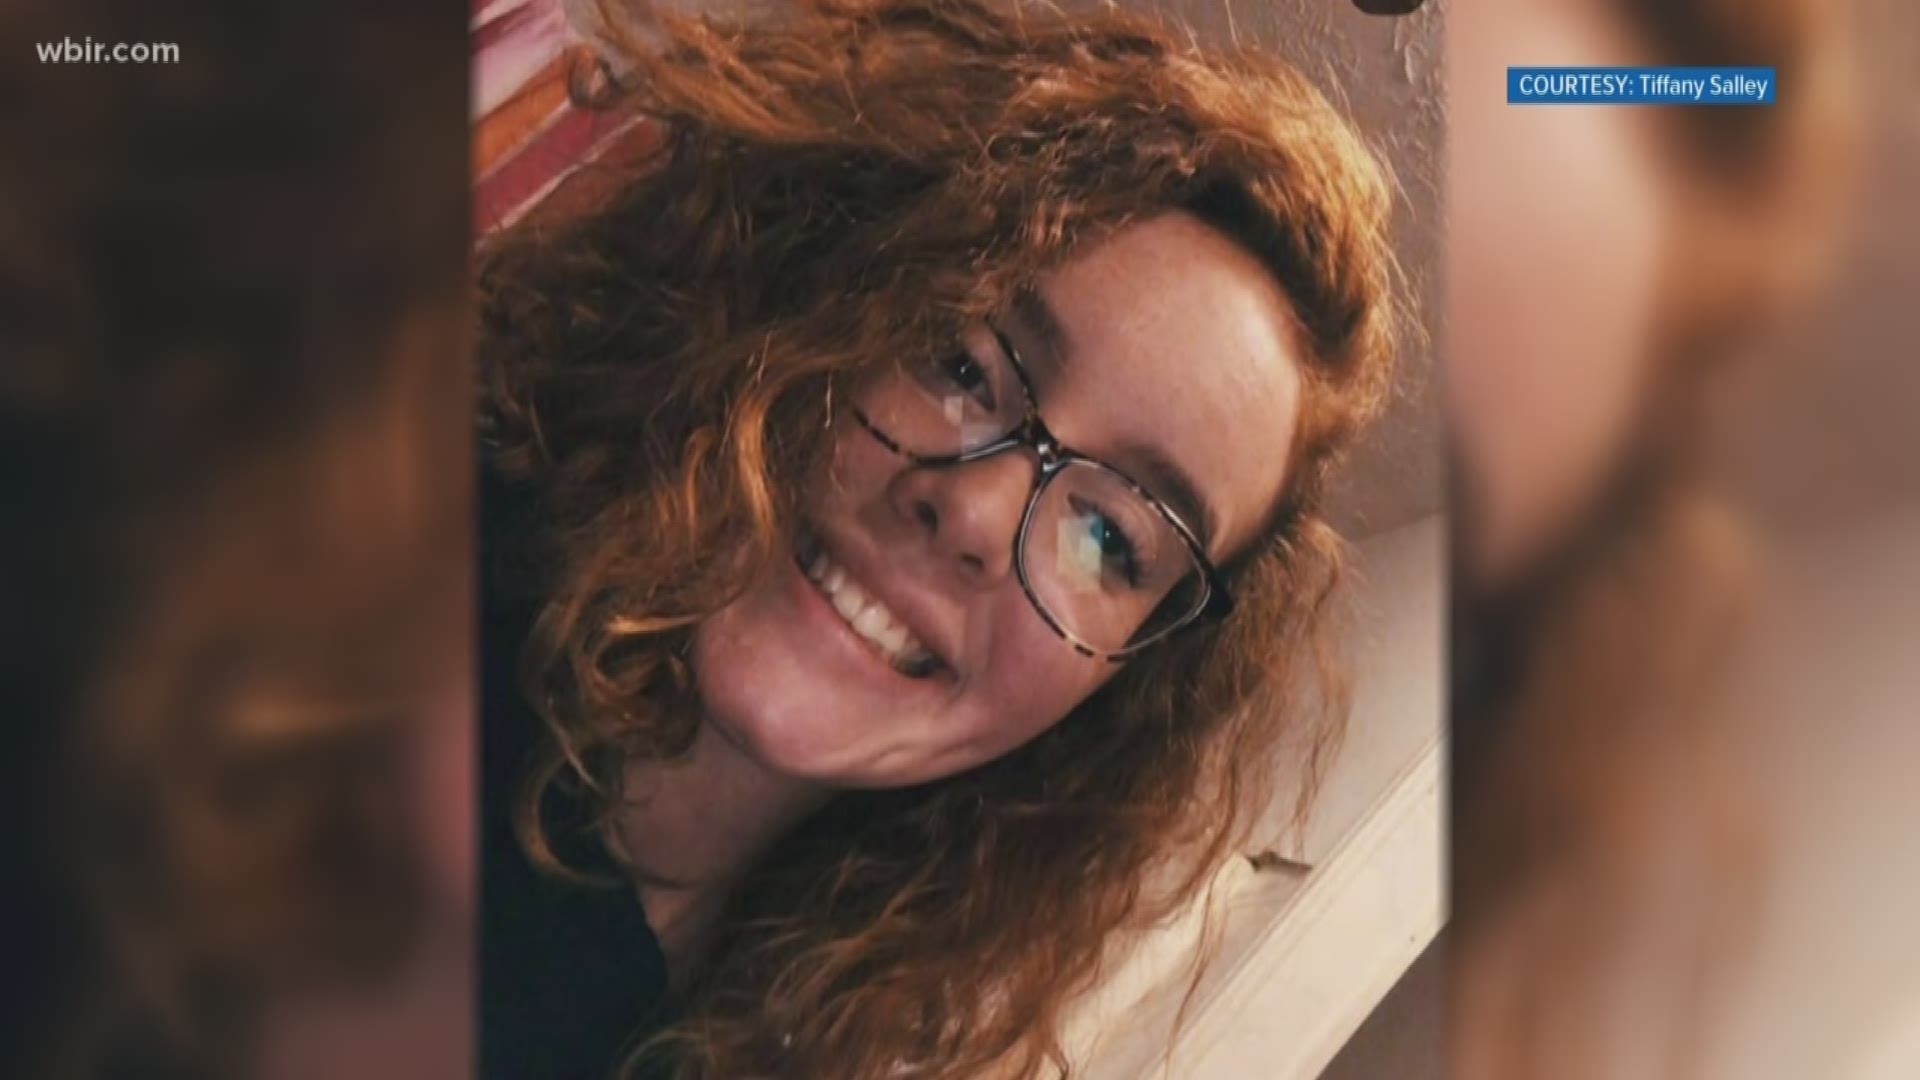 The Sweetwater community is mourning the loss of Callie Jordan, 15, who was killed while serving on a mission trip to Mexico.